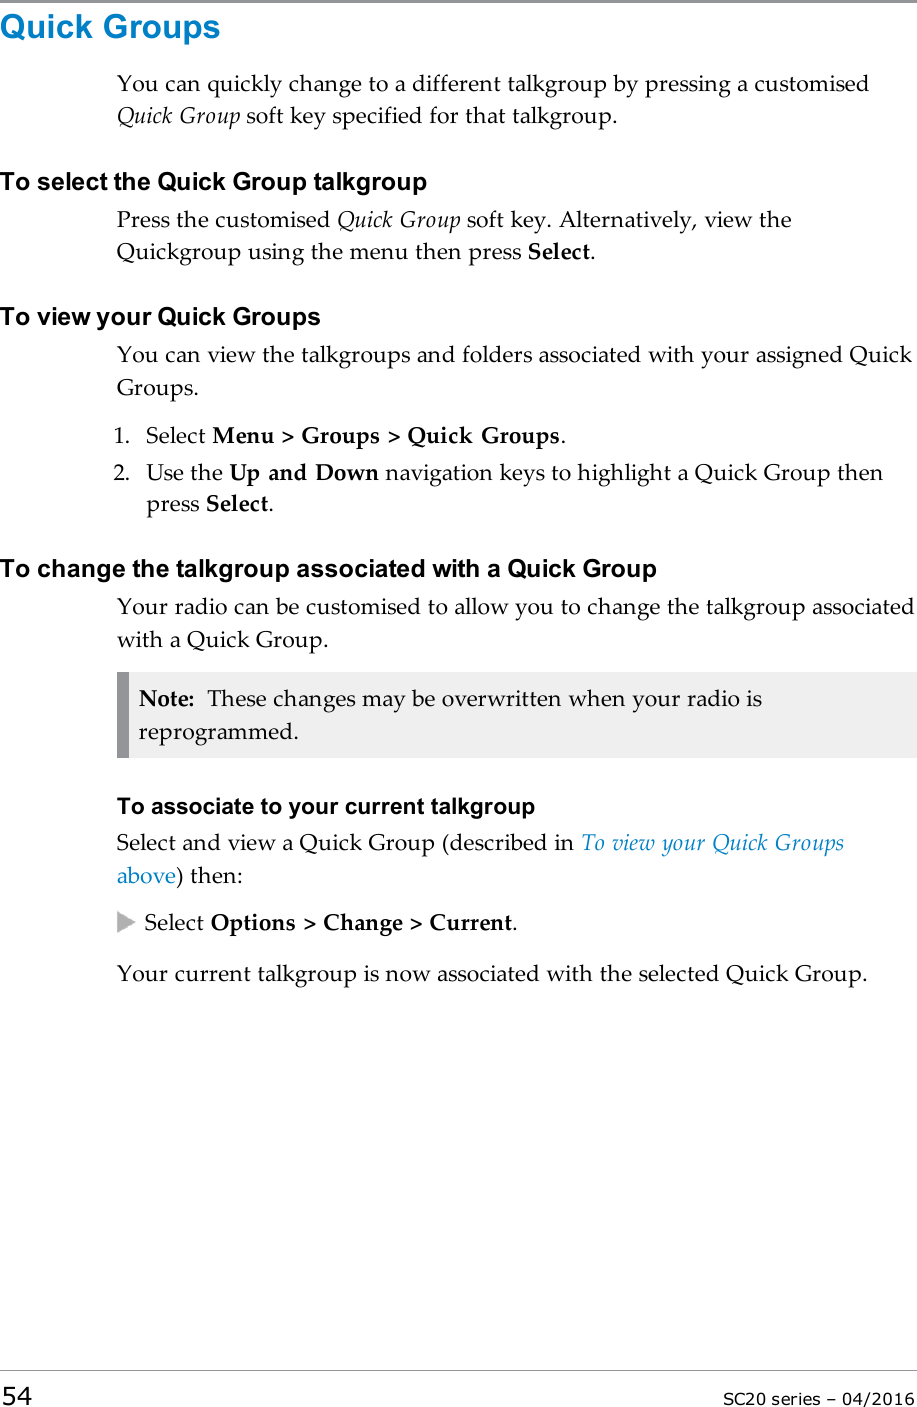 Quick GroupsYou can quickly change to a different talkgroup by pressing a customisedQuick Group soft key specified for that talkgroup.To select the Quick Group talkgroupPress the customised Quick Group soft key. Alternatively, view theQuickgroup using the menu then press Select.To view your Quick GroupsYou can view the talkgroups and folders associated with your assigned QuickGroups.1. Select Menu &gt; Groups &gt; Quick Groups.2. Use the Up and Down navigation keys to highlight a Quick Group thenpress Select.To change the talkgroup associated with a Quick GroupYour radio can be customised to allow you to change the talkgroup associatedwith a Quick Group.Note: These changes may be overwritten when your radio isreprogrammed.To associate to your current talkgroupSelect and view a Quick Group (described in To view your Quick Groupsabove) then:Select Options &gt; Change &gt; Current.Your current talkgroup is now associated with the selected Quick Group.54 SC20 series – 04/2016